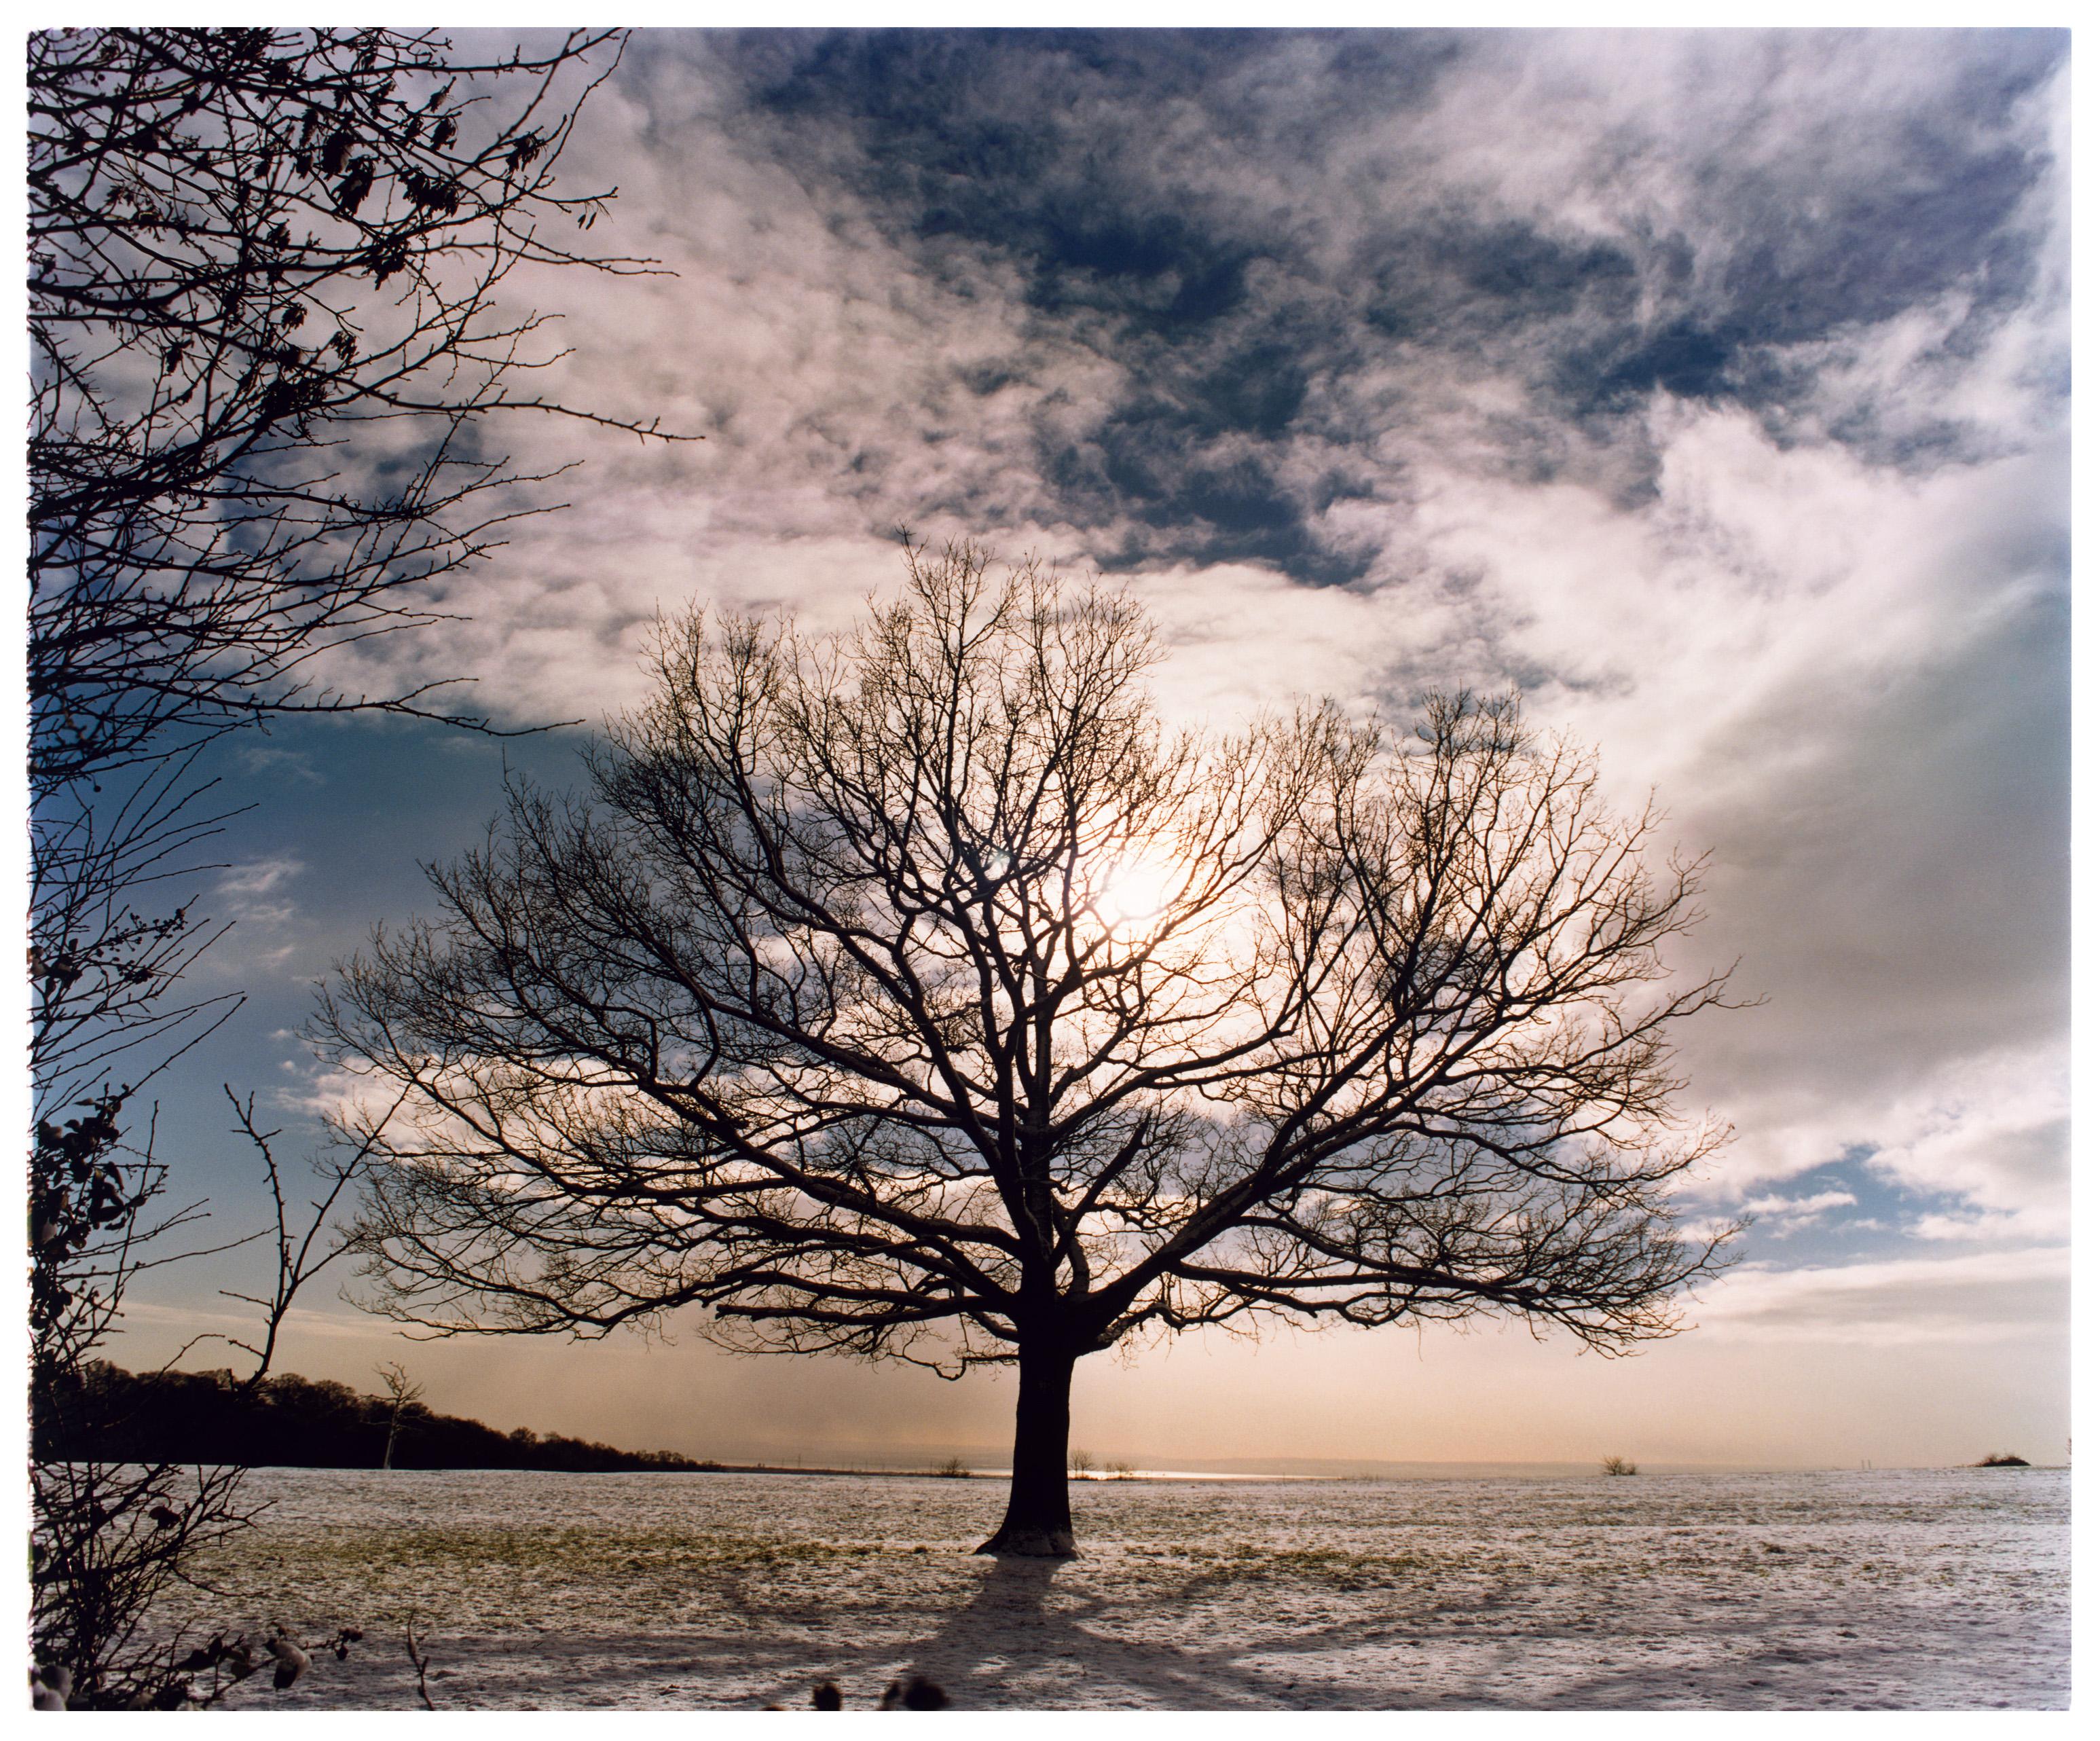 Richard Heeps Color Photograph - One Tree Hill, Langdon Hills Country Park - English landscape photography